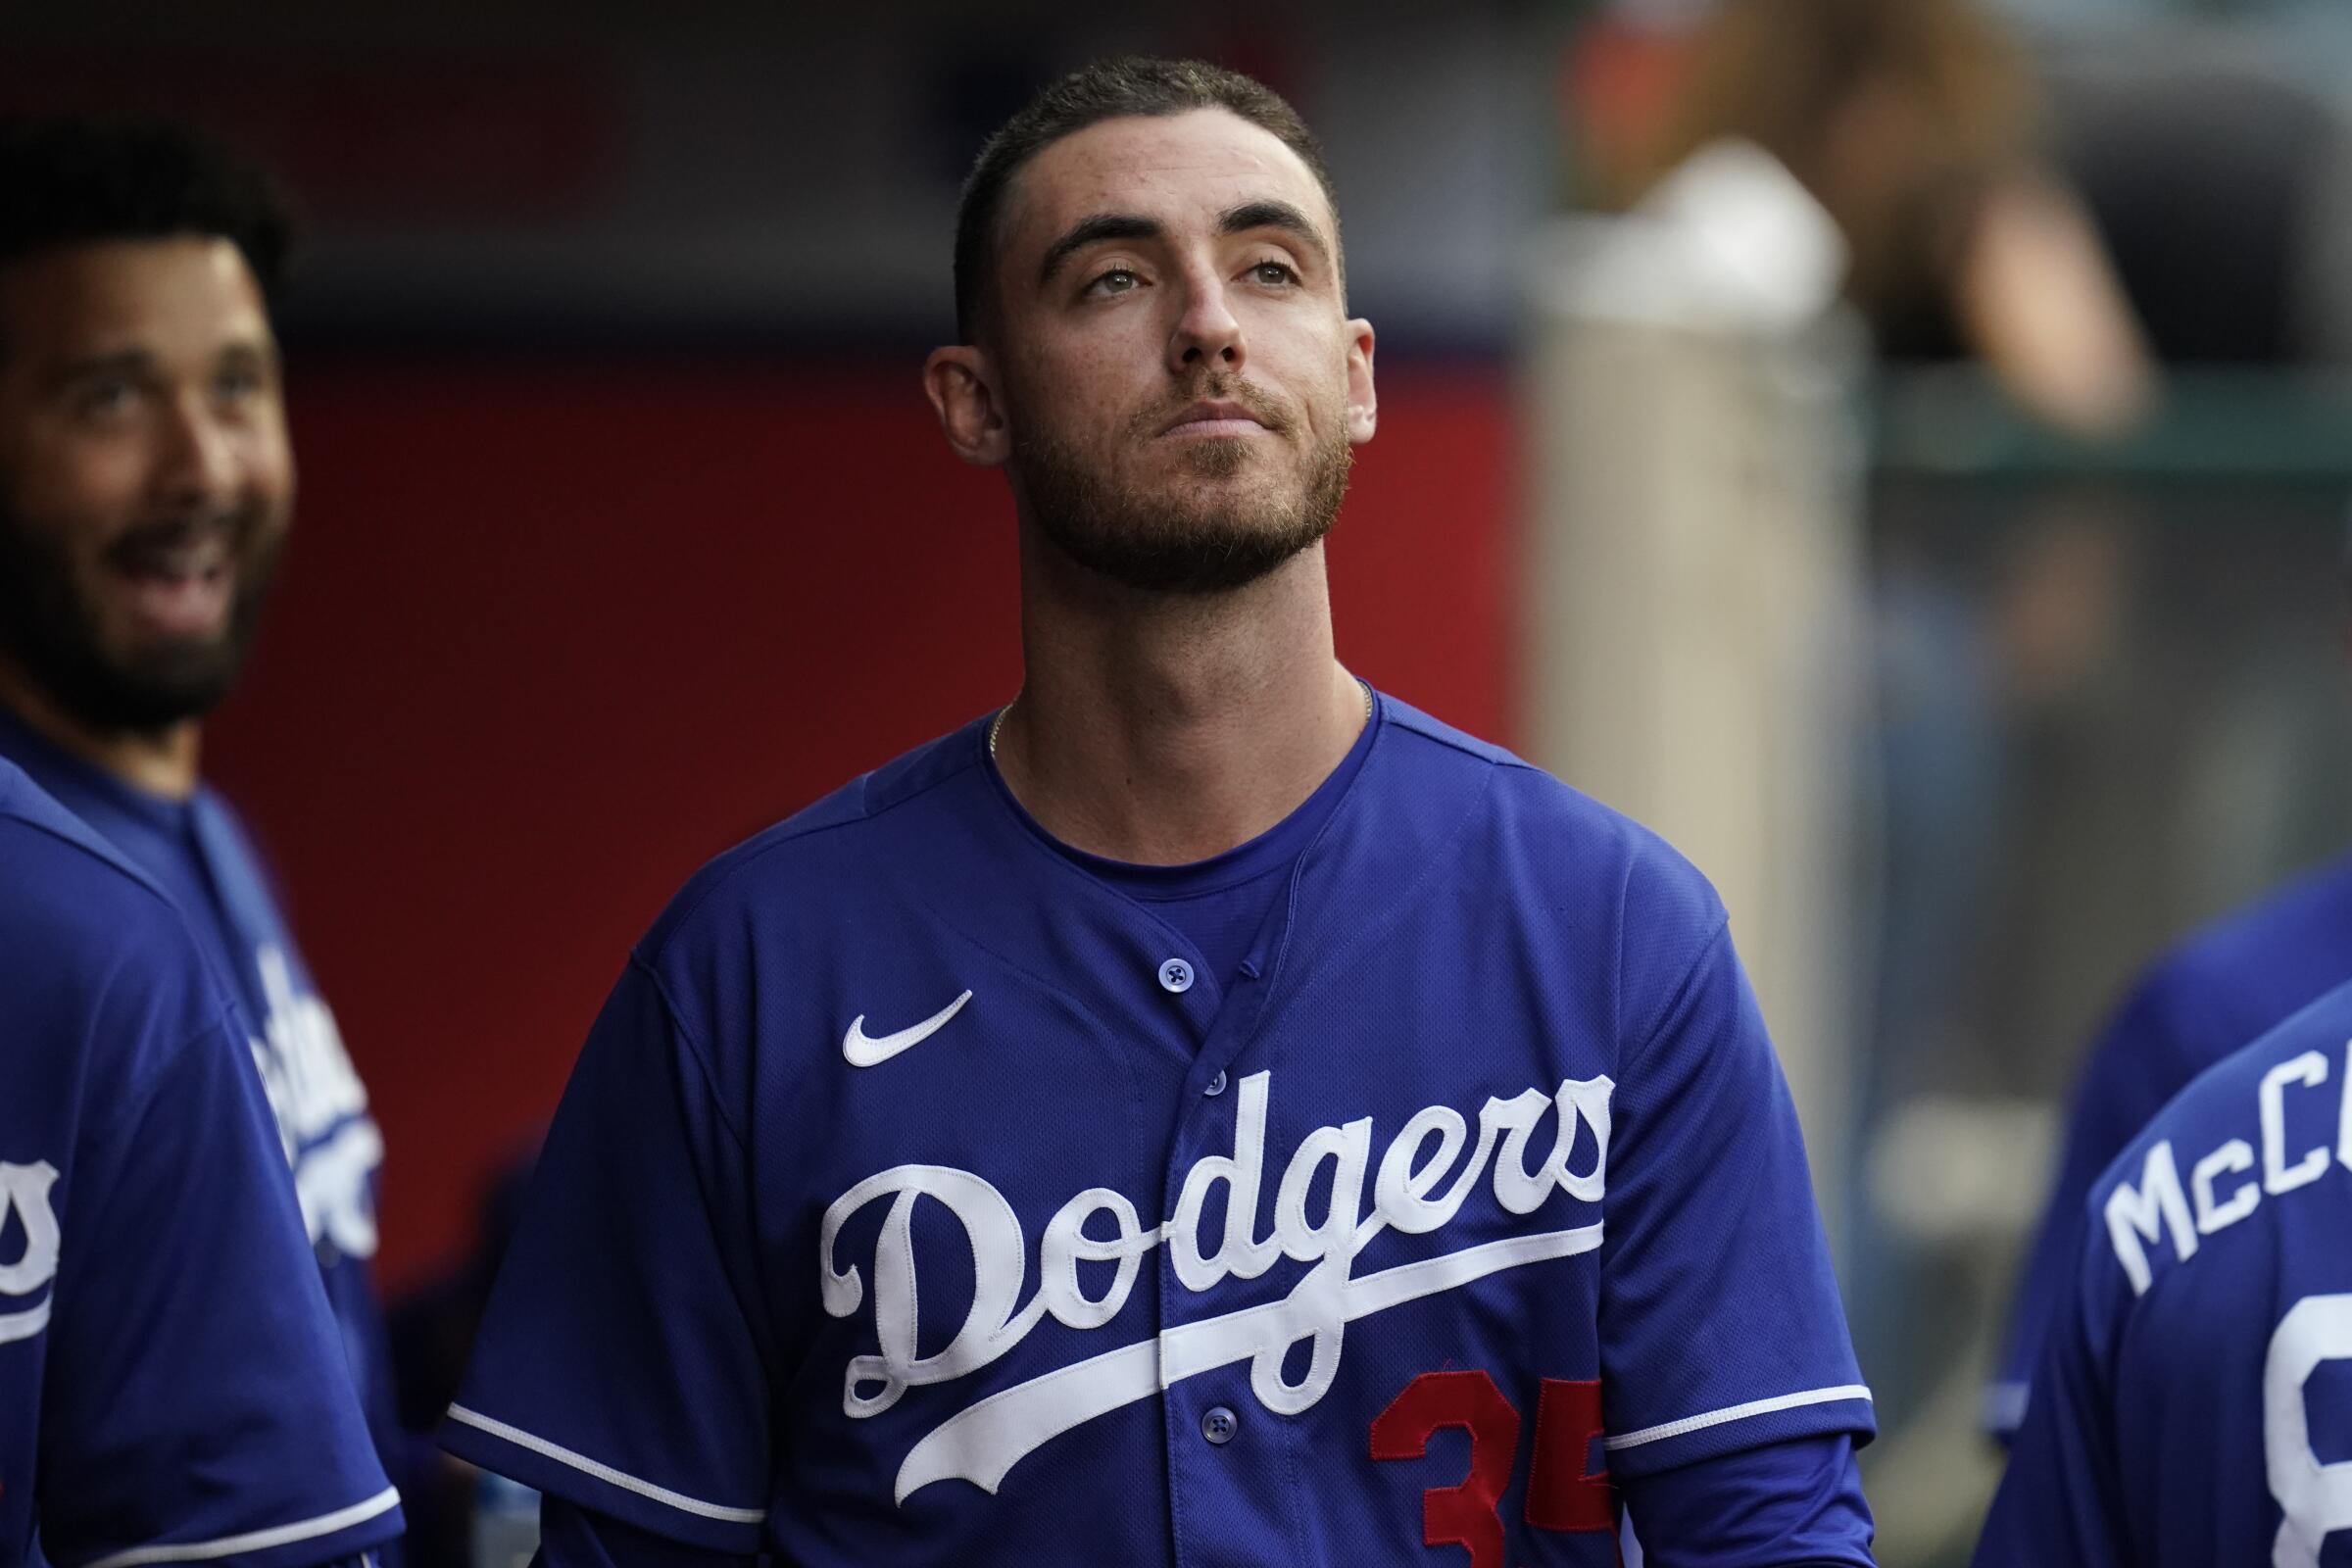 Dodgers center fielder Cody Bellinger walks through the dugout during a game against the Angels.